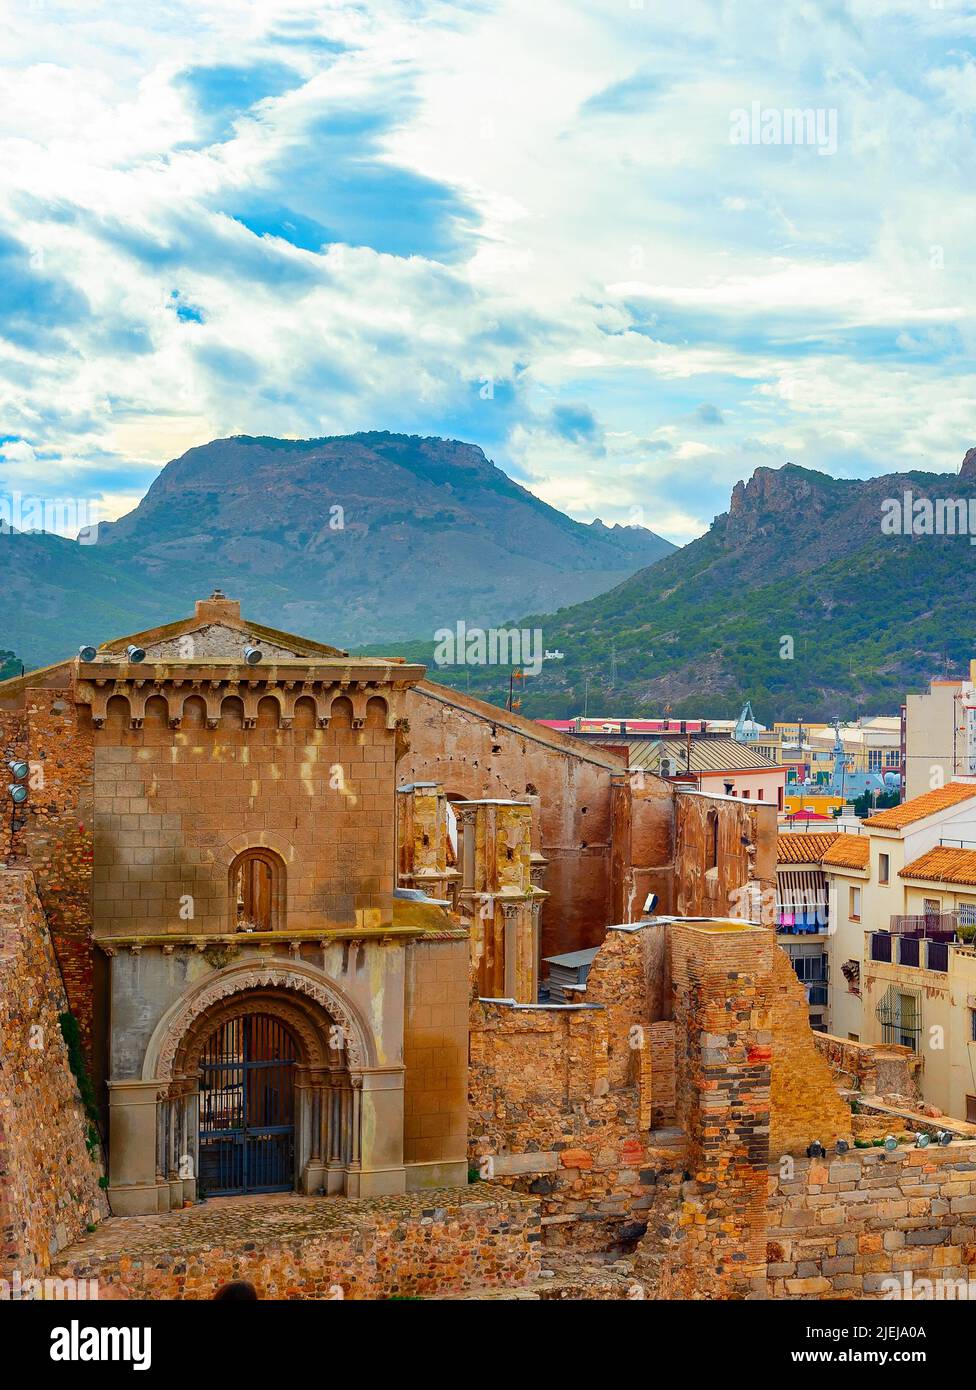 Cityscape with mountains and colorful houses in background, Cartagena, Spain Stock Photo